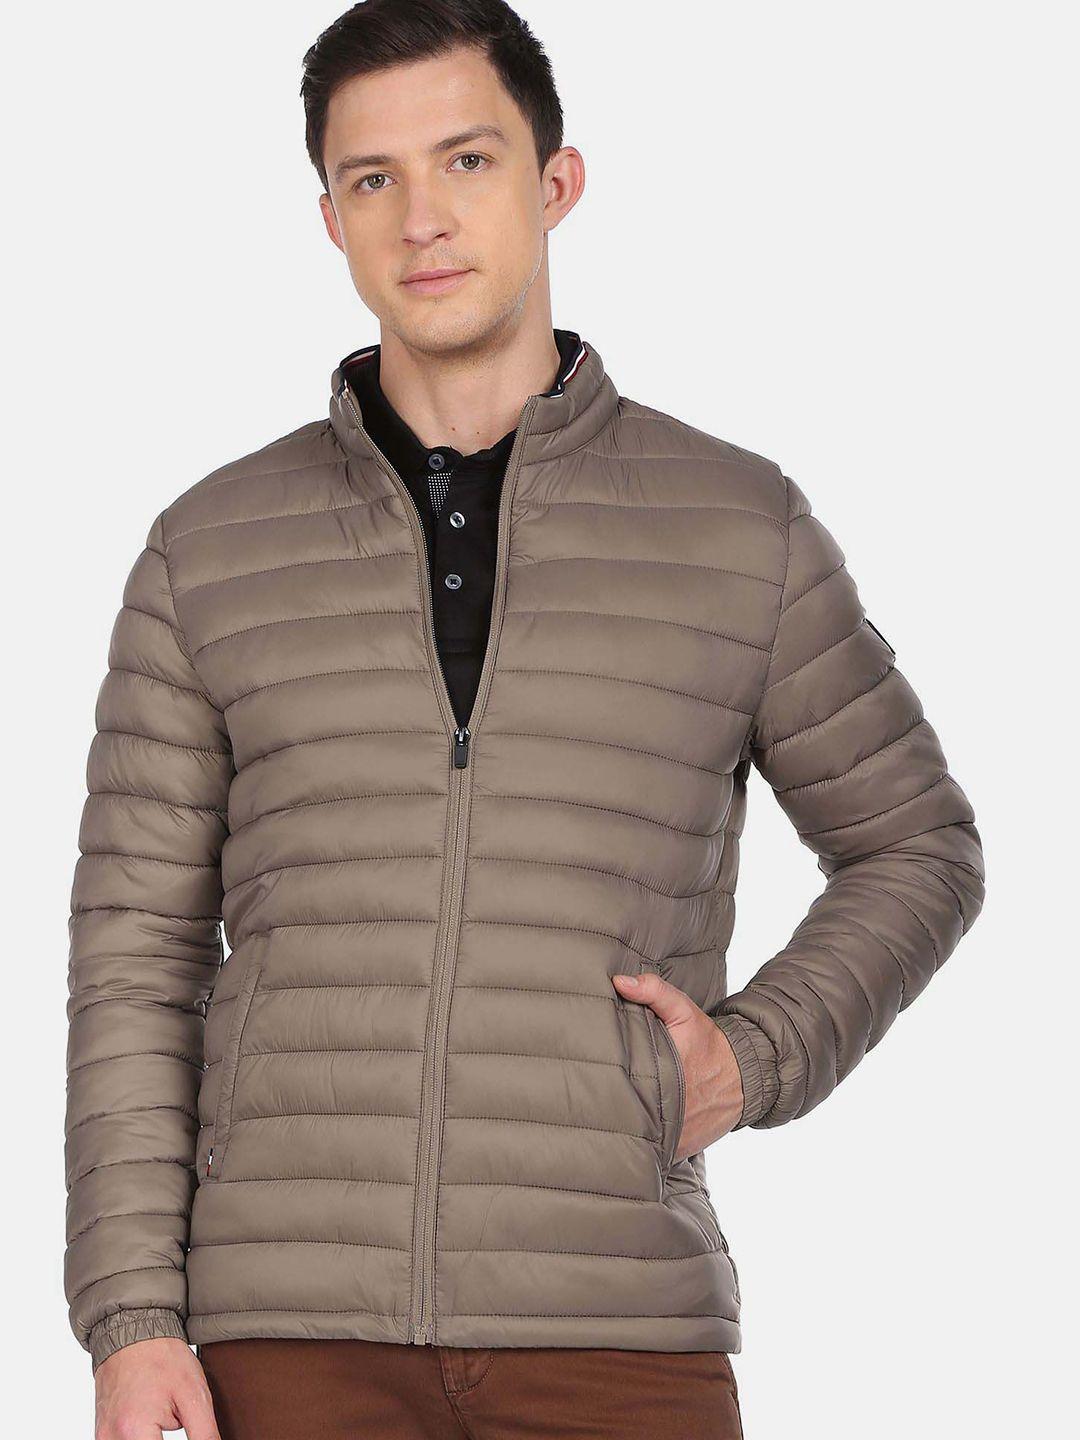 arrow sport men brown striped quilted puffer jacket